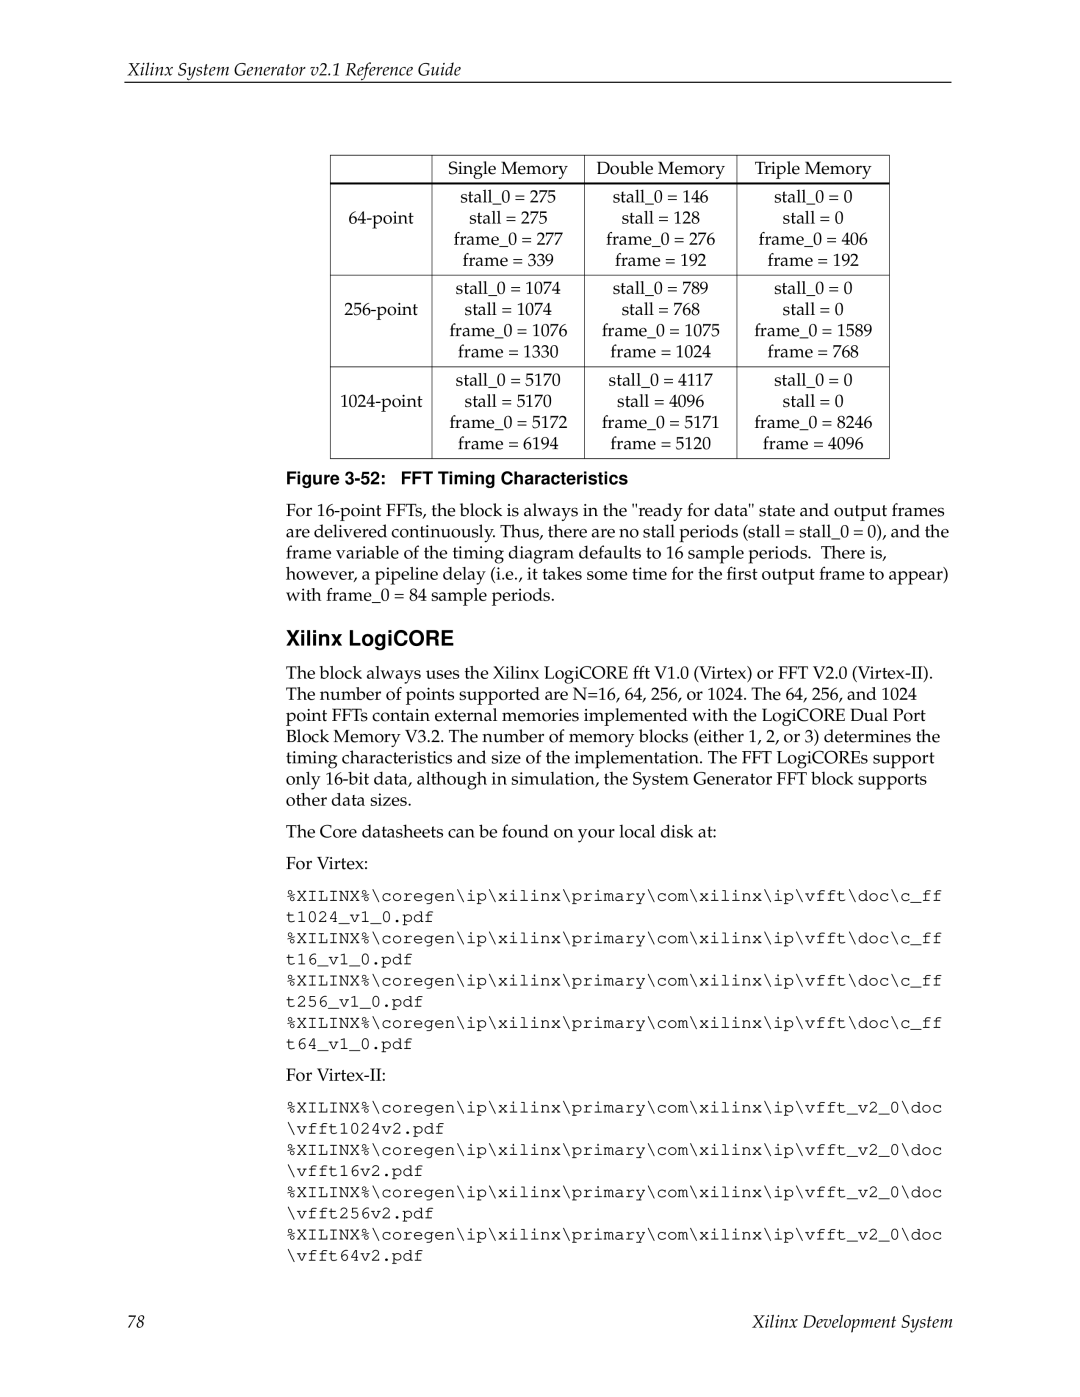 Xilinx V2.1 manual Xilinx LogiCORE, Xilinx System Generator v2.1 Reference Guide, 52:FFT Timing Characteristics 